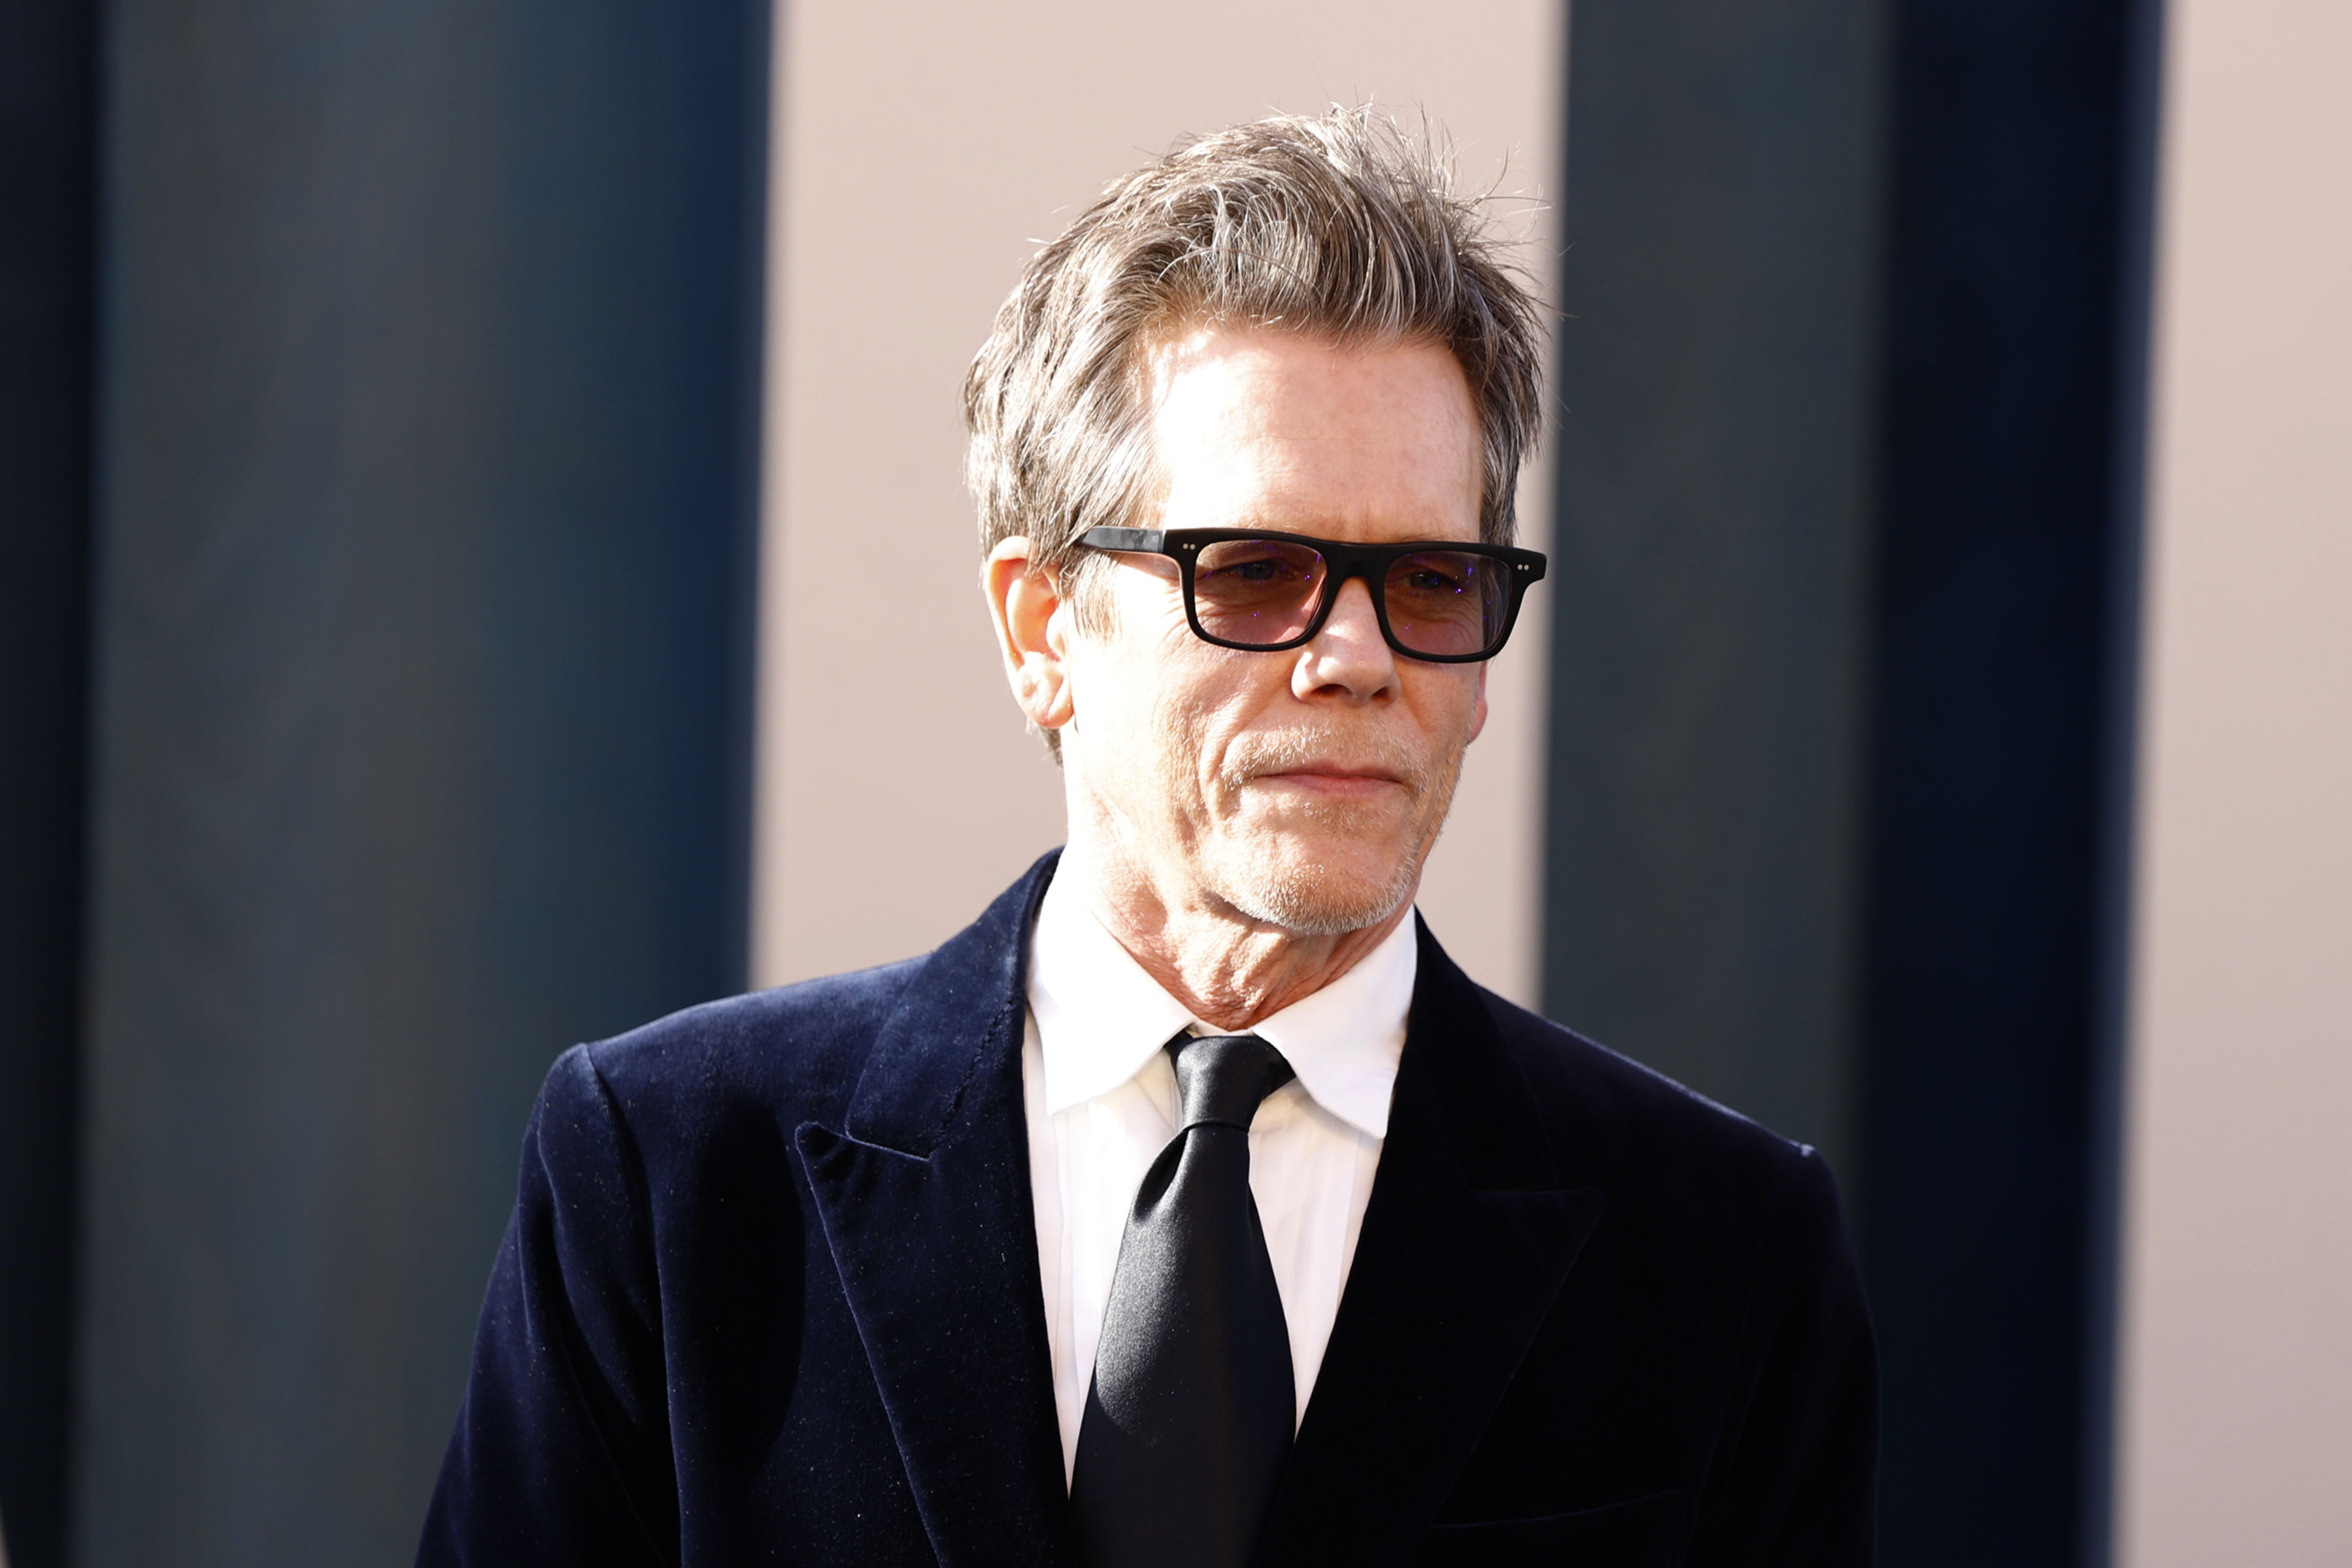 Horror movie They/Them actor Kevin Bacon attends the 2022 Vanity Fair Oscar party